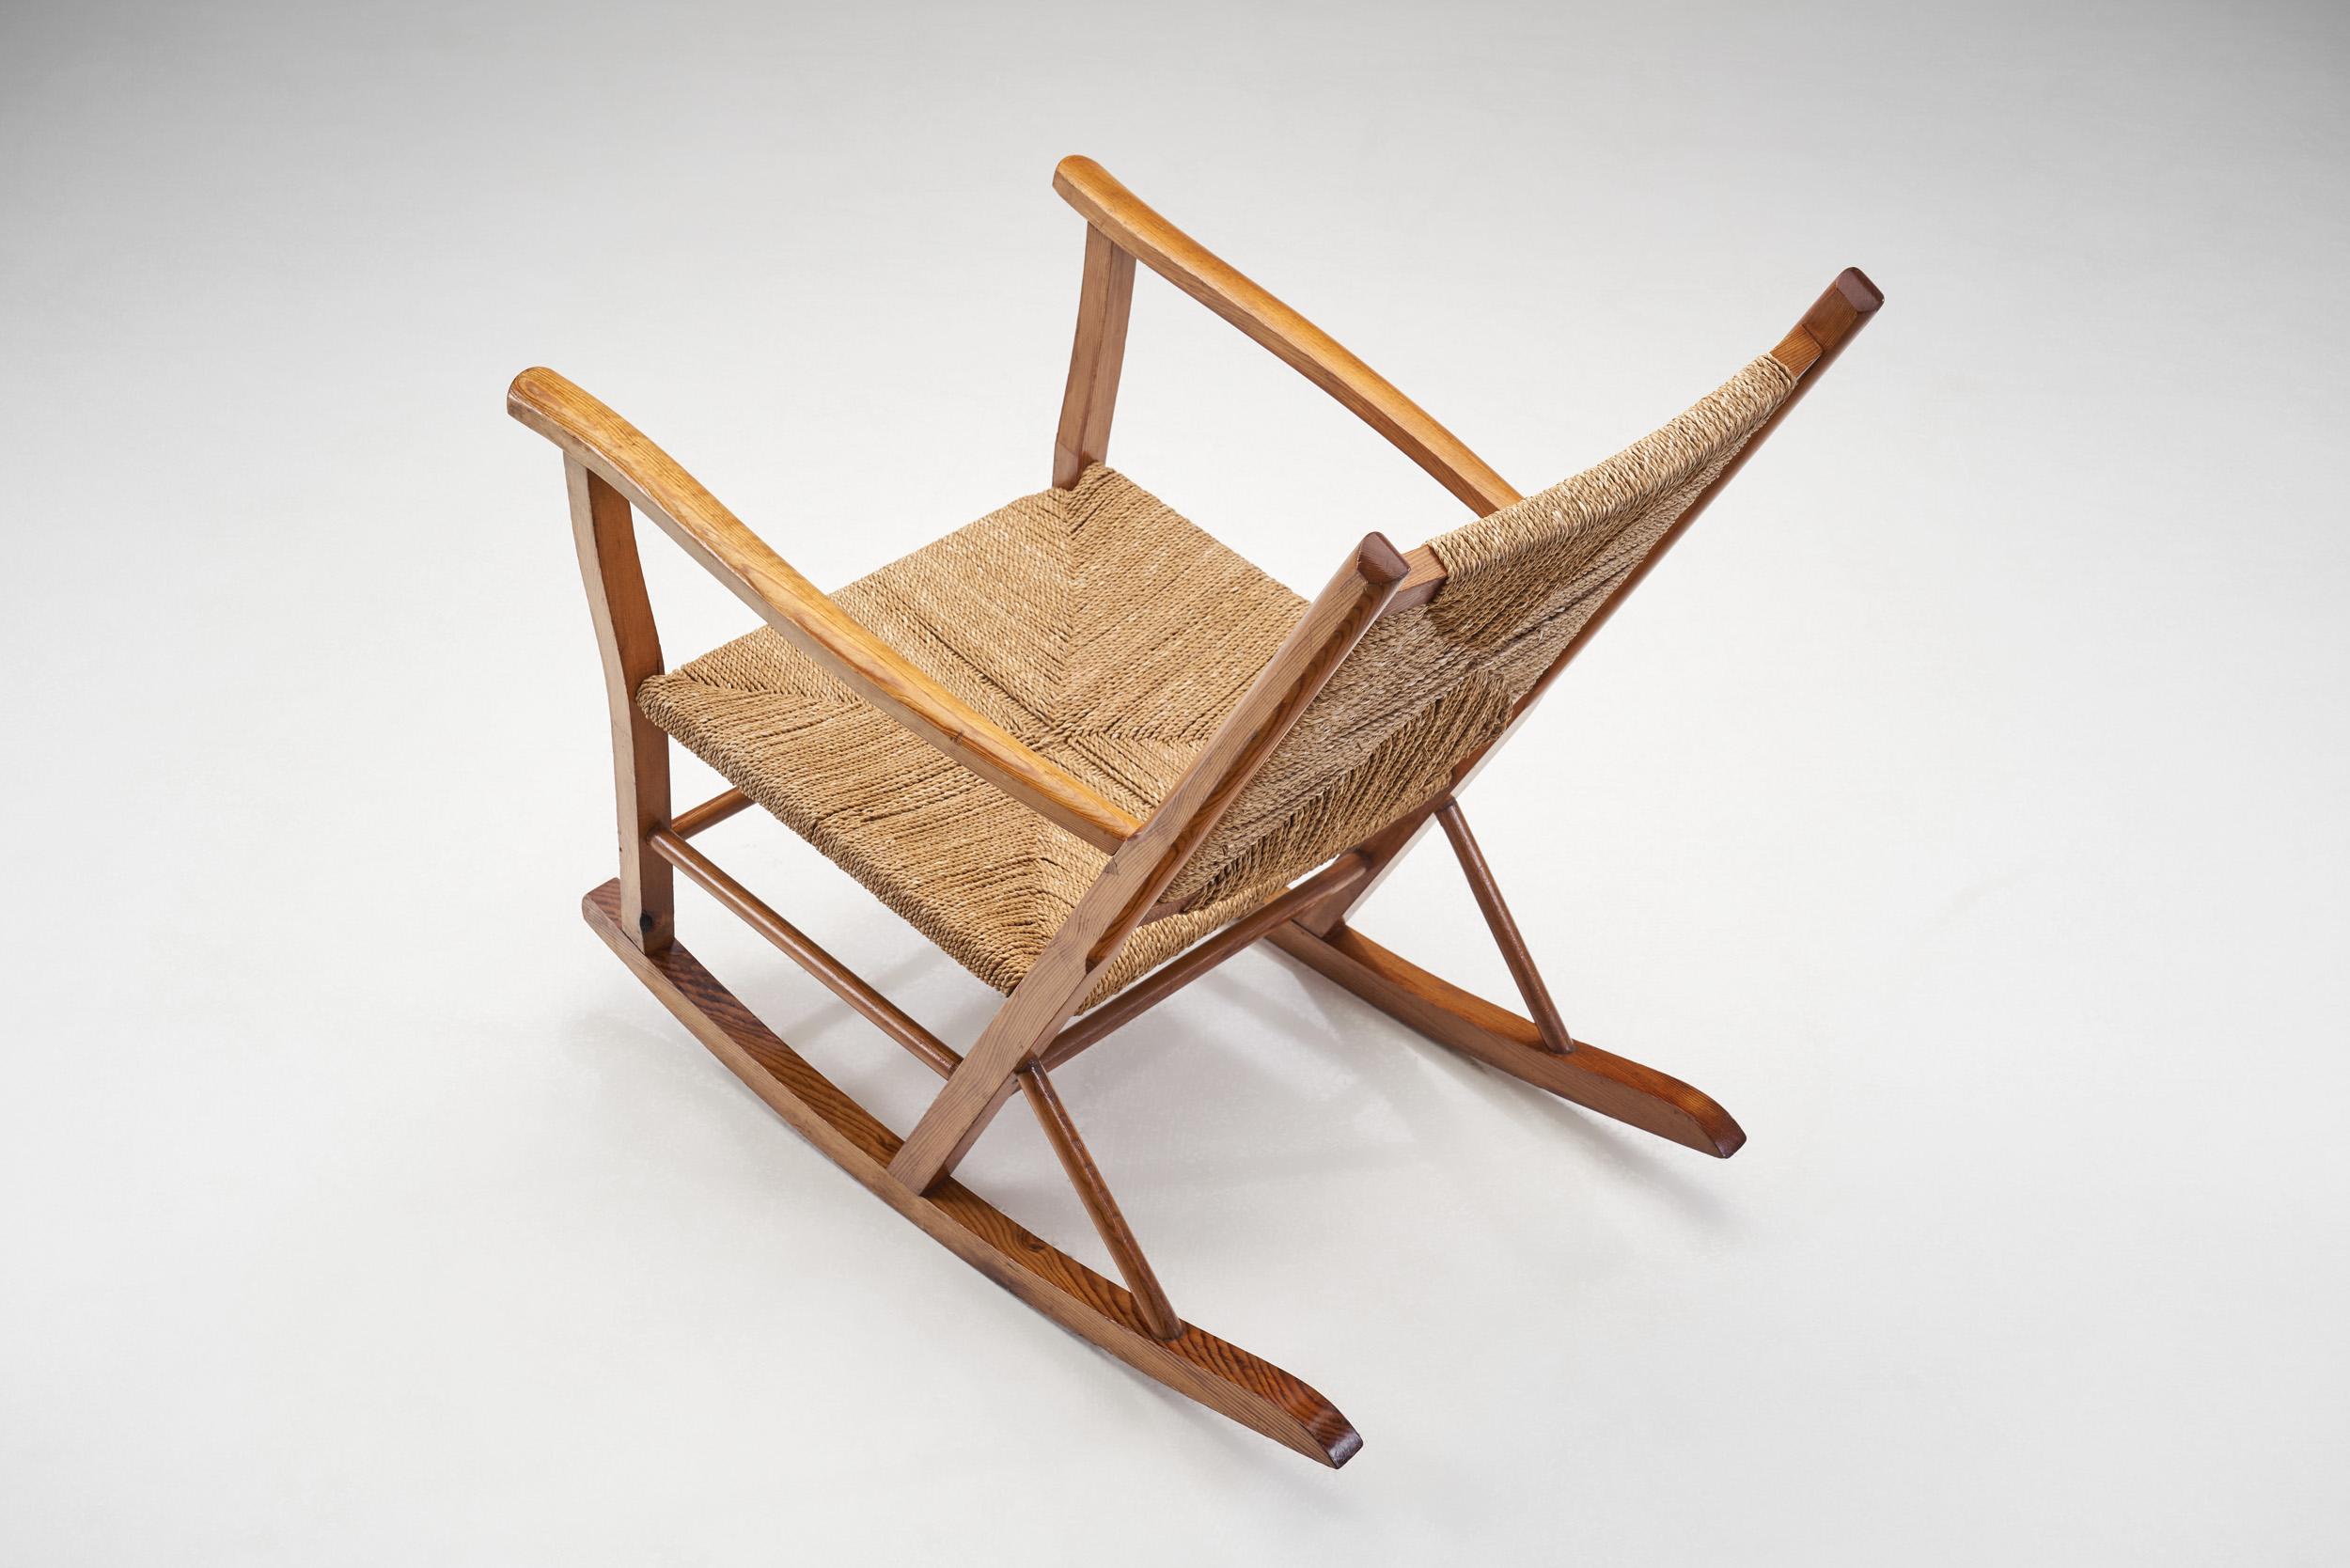 Mid-20th Century Norwegian Wood and Papercord Rocking Chair by Slåke Møbelfabrik, Norway 1940s For Sale